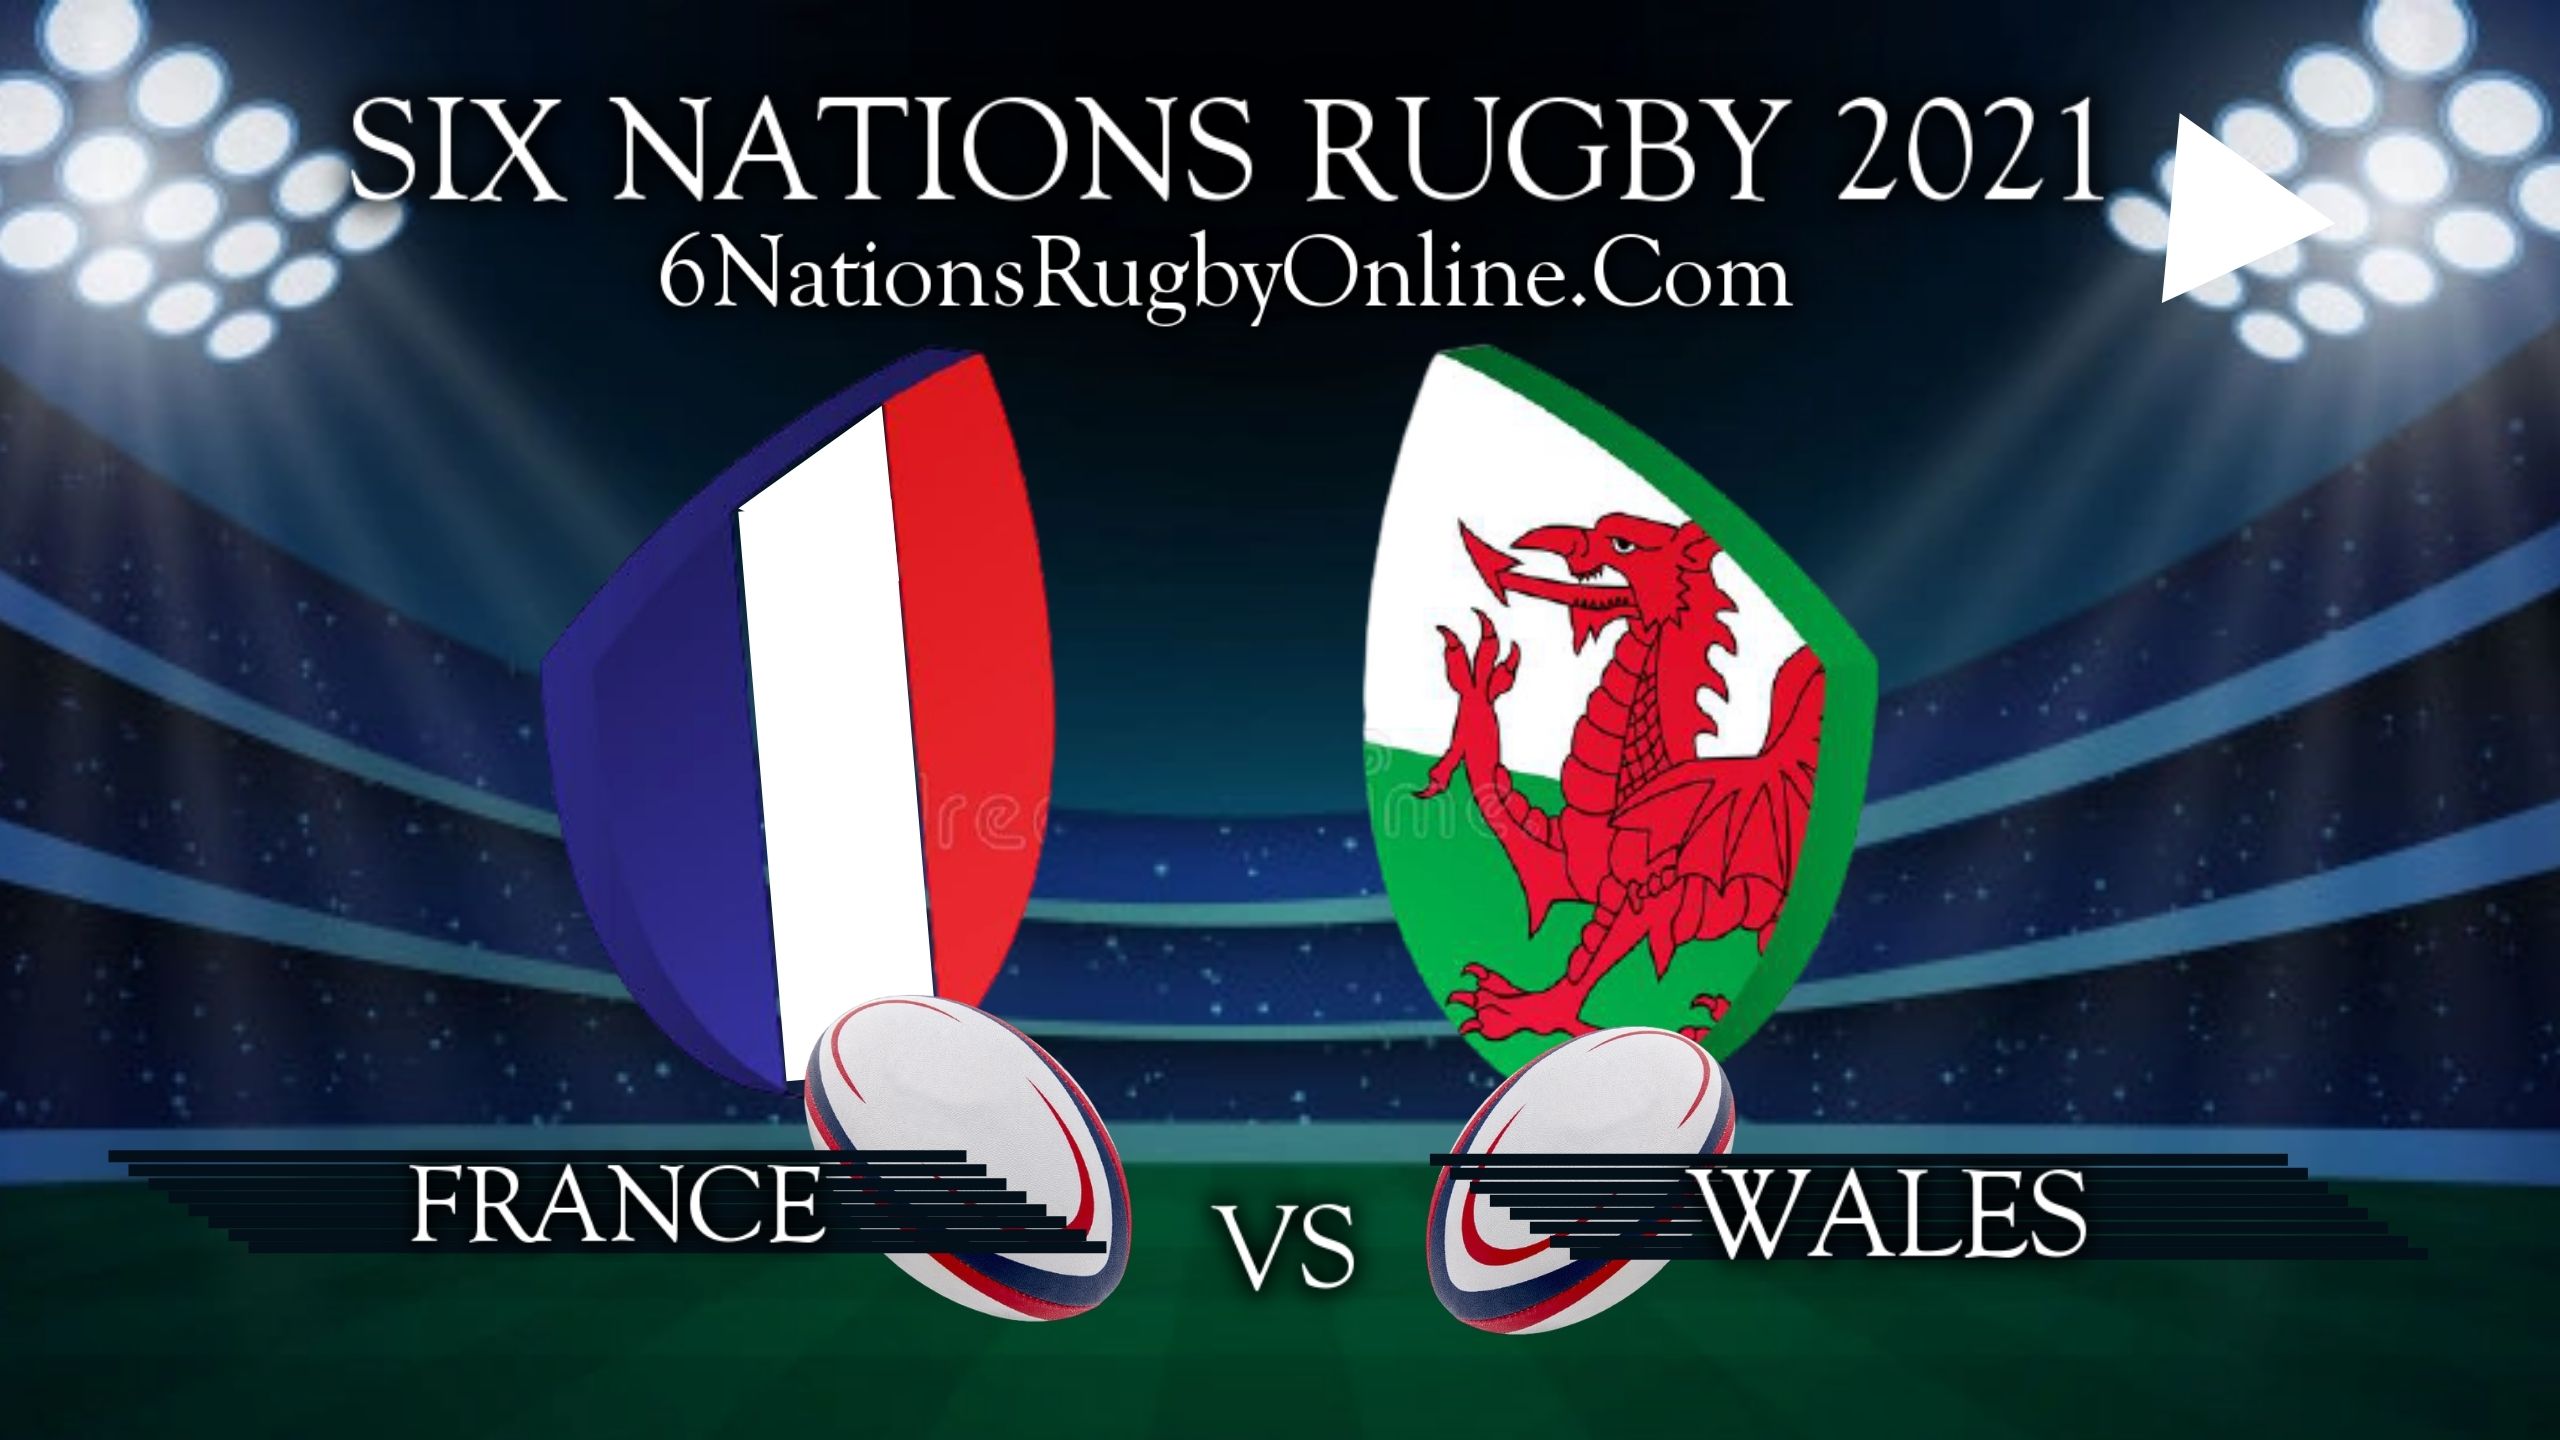 France vs Wales Result 2021 Rd 5 | Six Nations Rugby